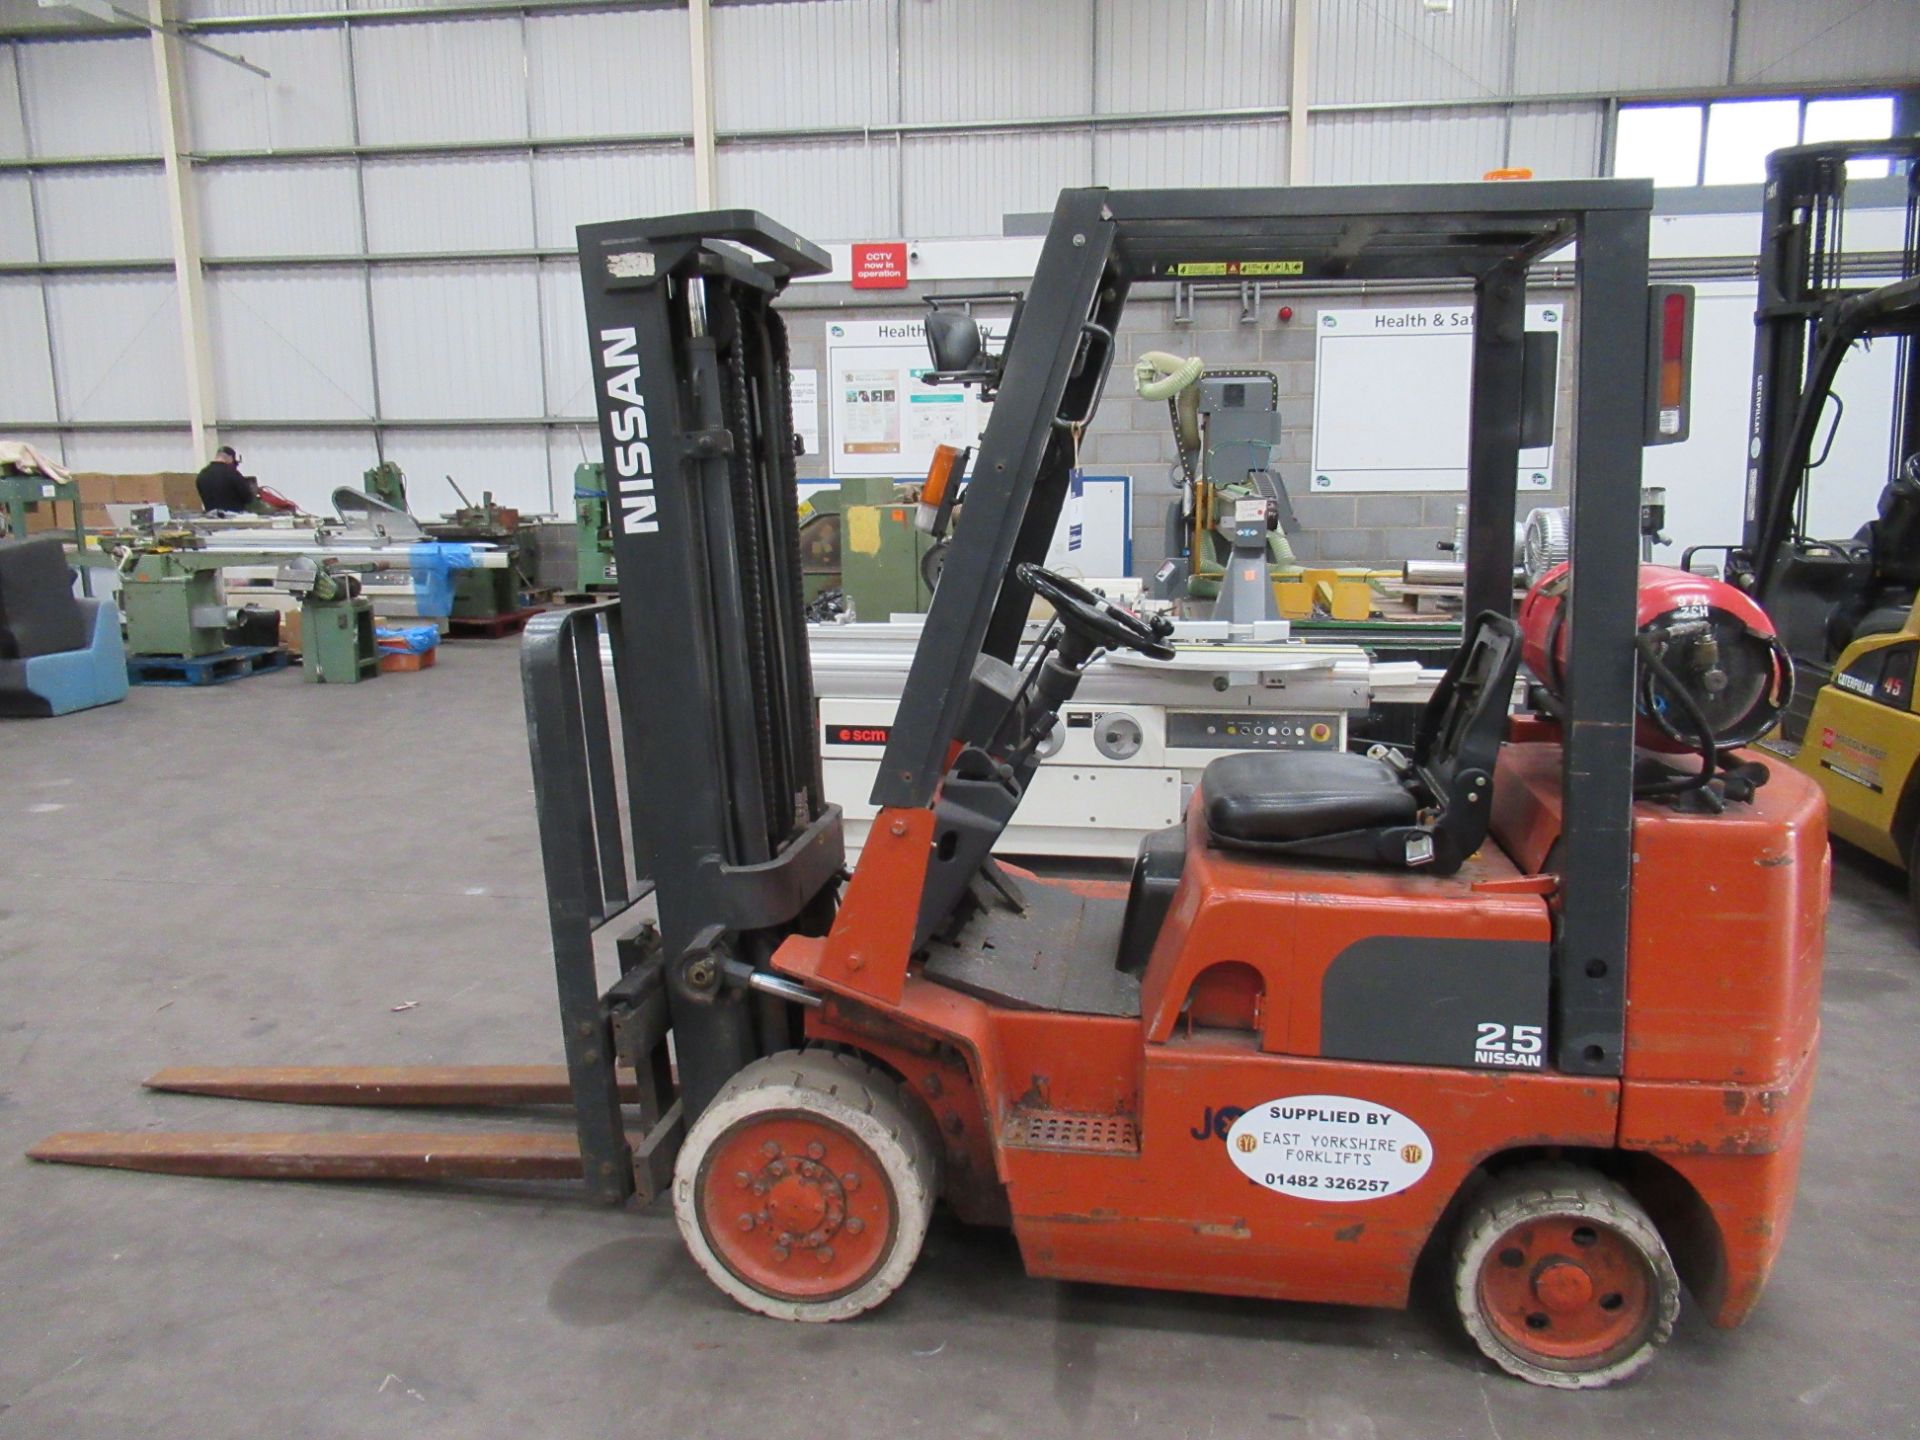 Nissan 25 Gas Powered Forklift Truck with Sideshift Attachment, Max Capacity 2500kg. Drives and Oper